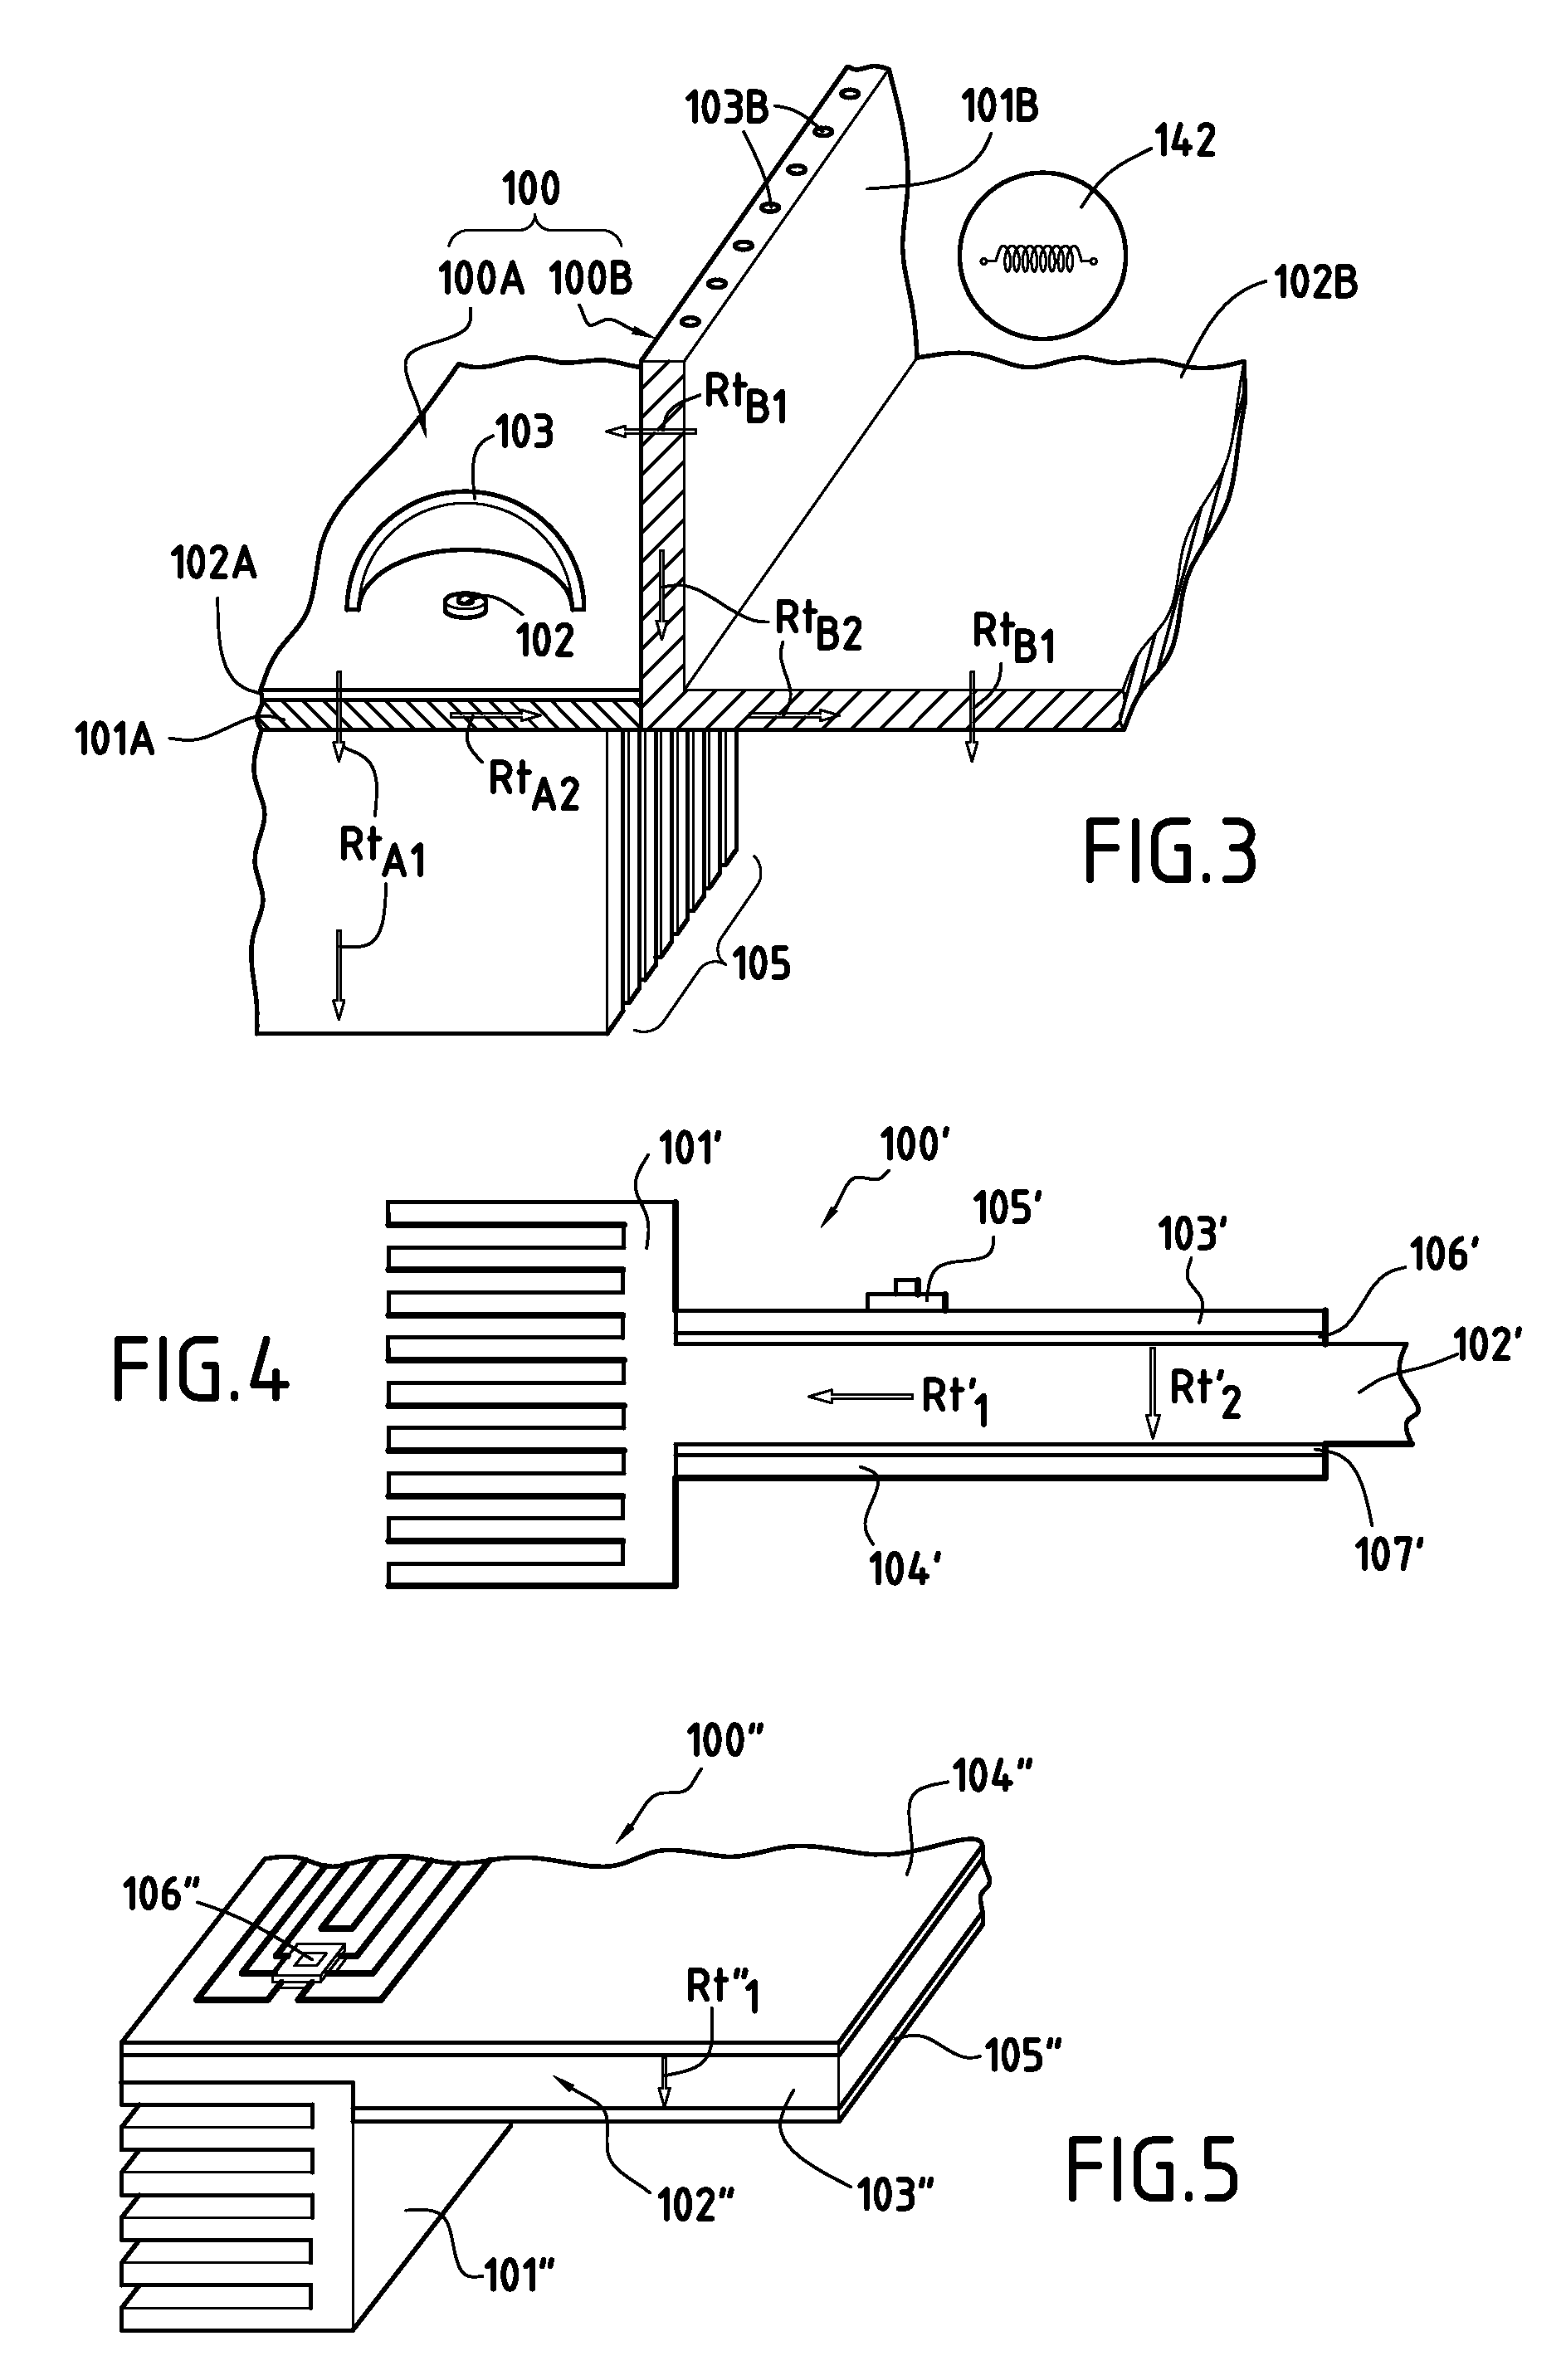 Lighting and/or signaling device for a motor vehicle incorporating a material having thermal anisotropy